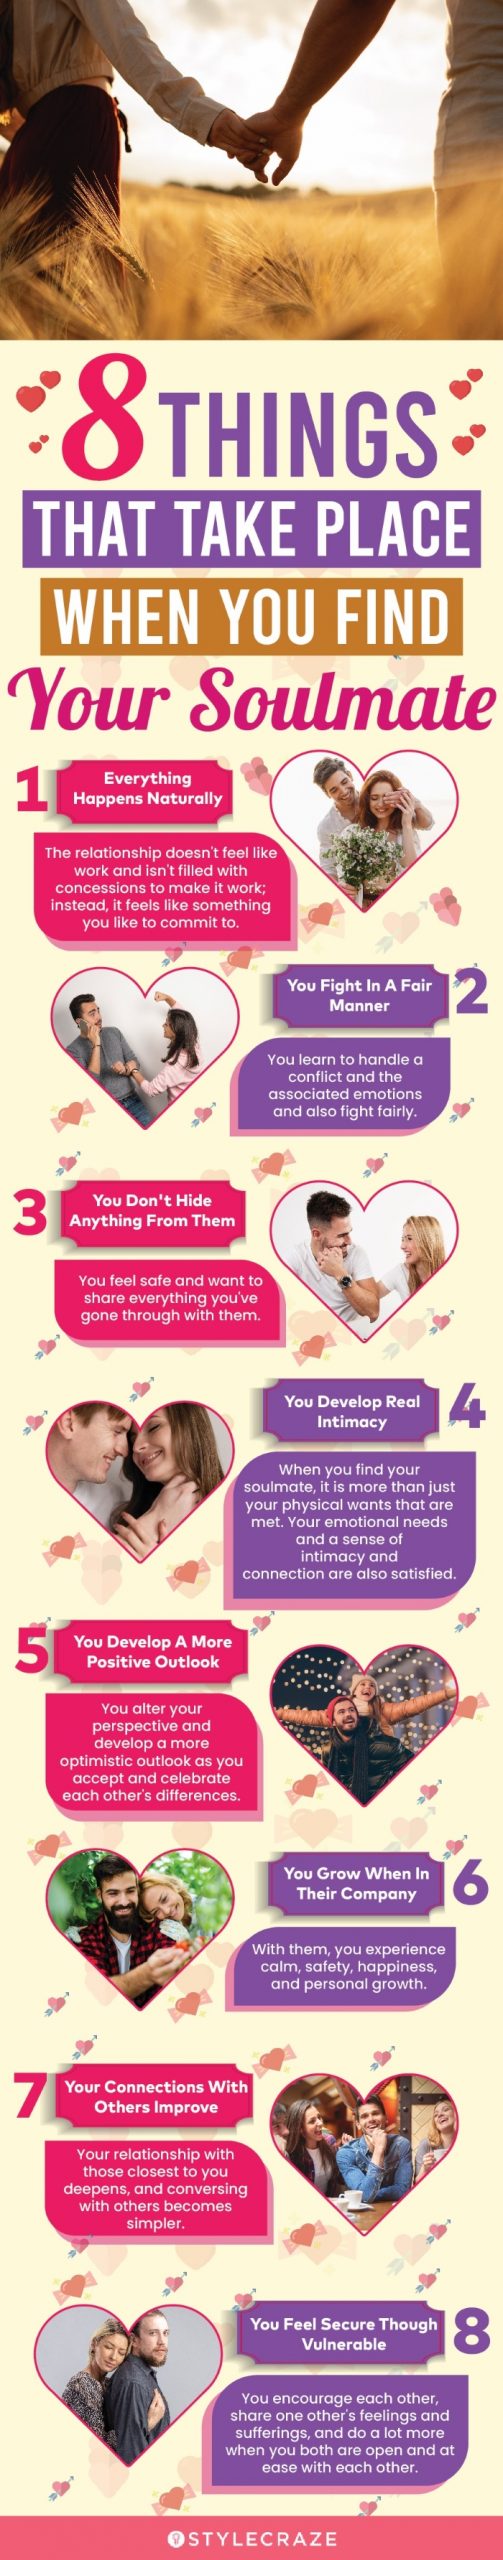 8 thimgs that take place when you find your soulmate(infographic)